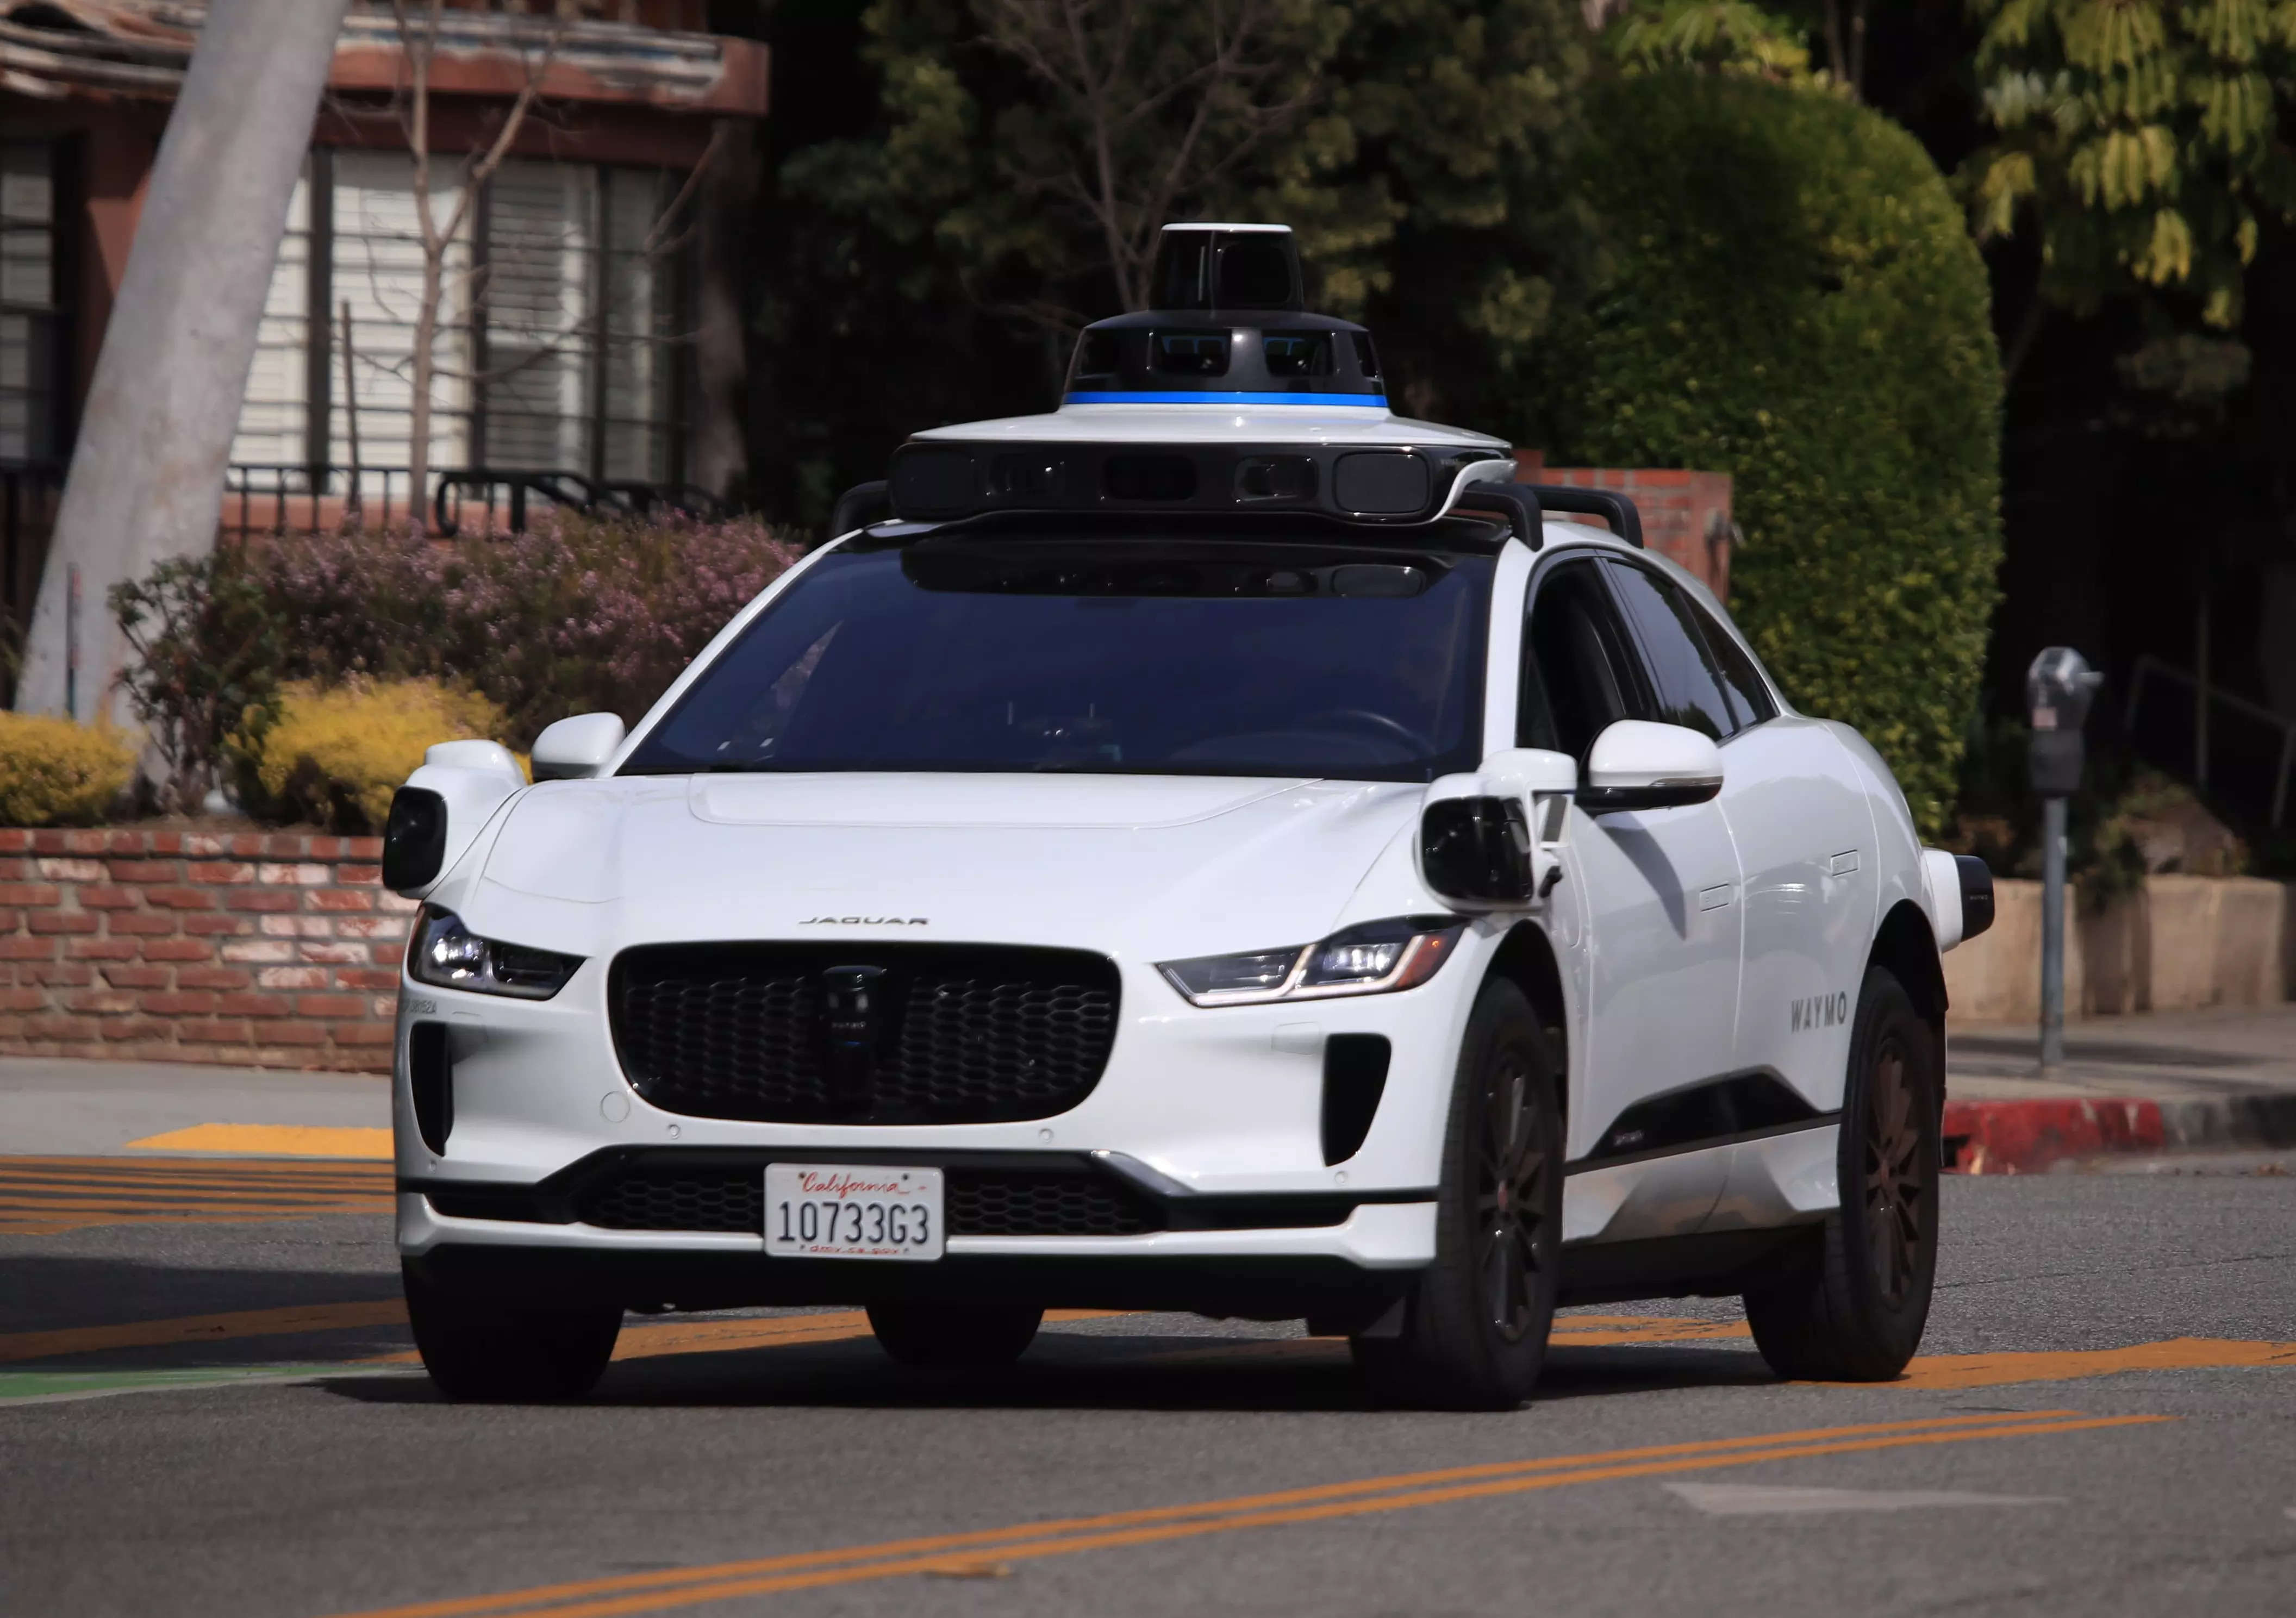 <p>Driverless cars were first introduced in San Francisco in 2014 with a mandatory human "safety driver" on board.</p>